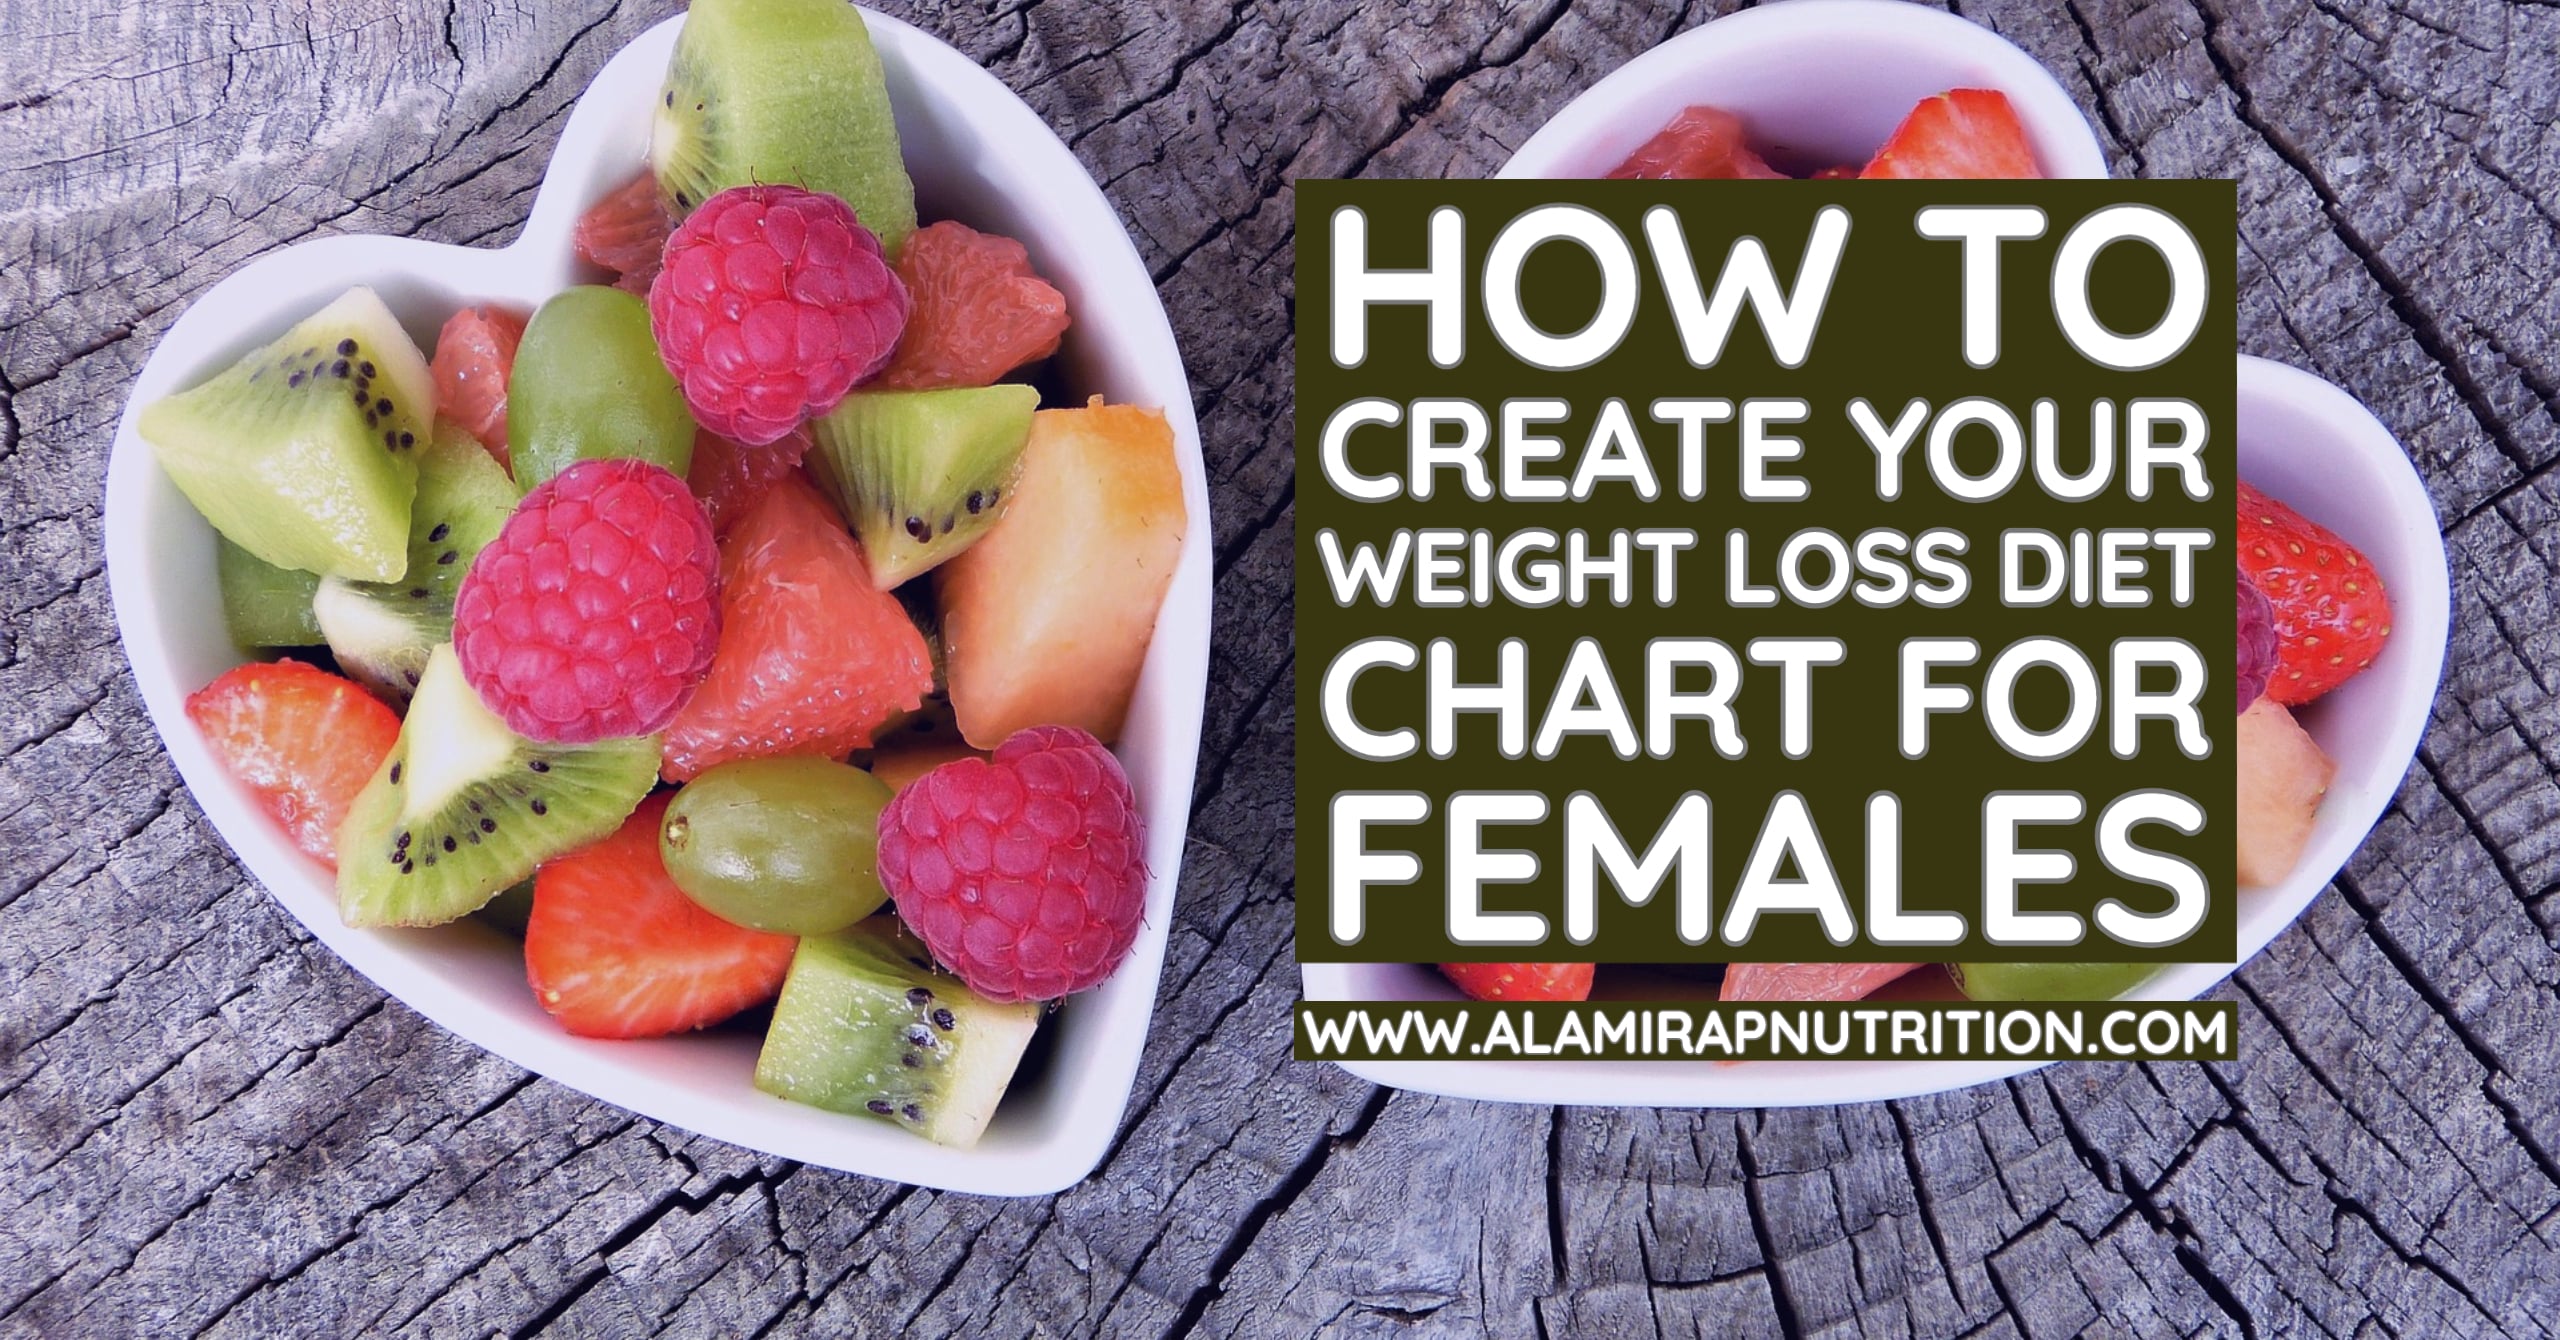 How to Create Your Weight Loss Diet Chart for Females